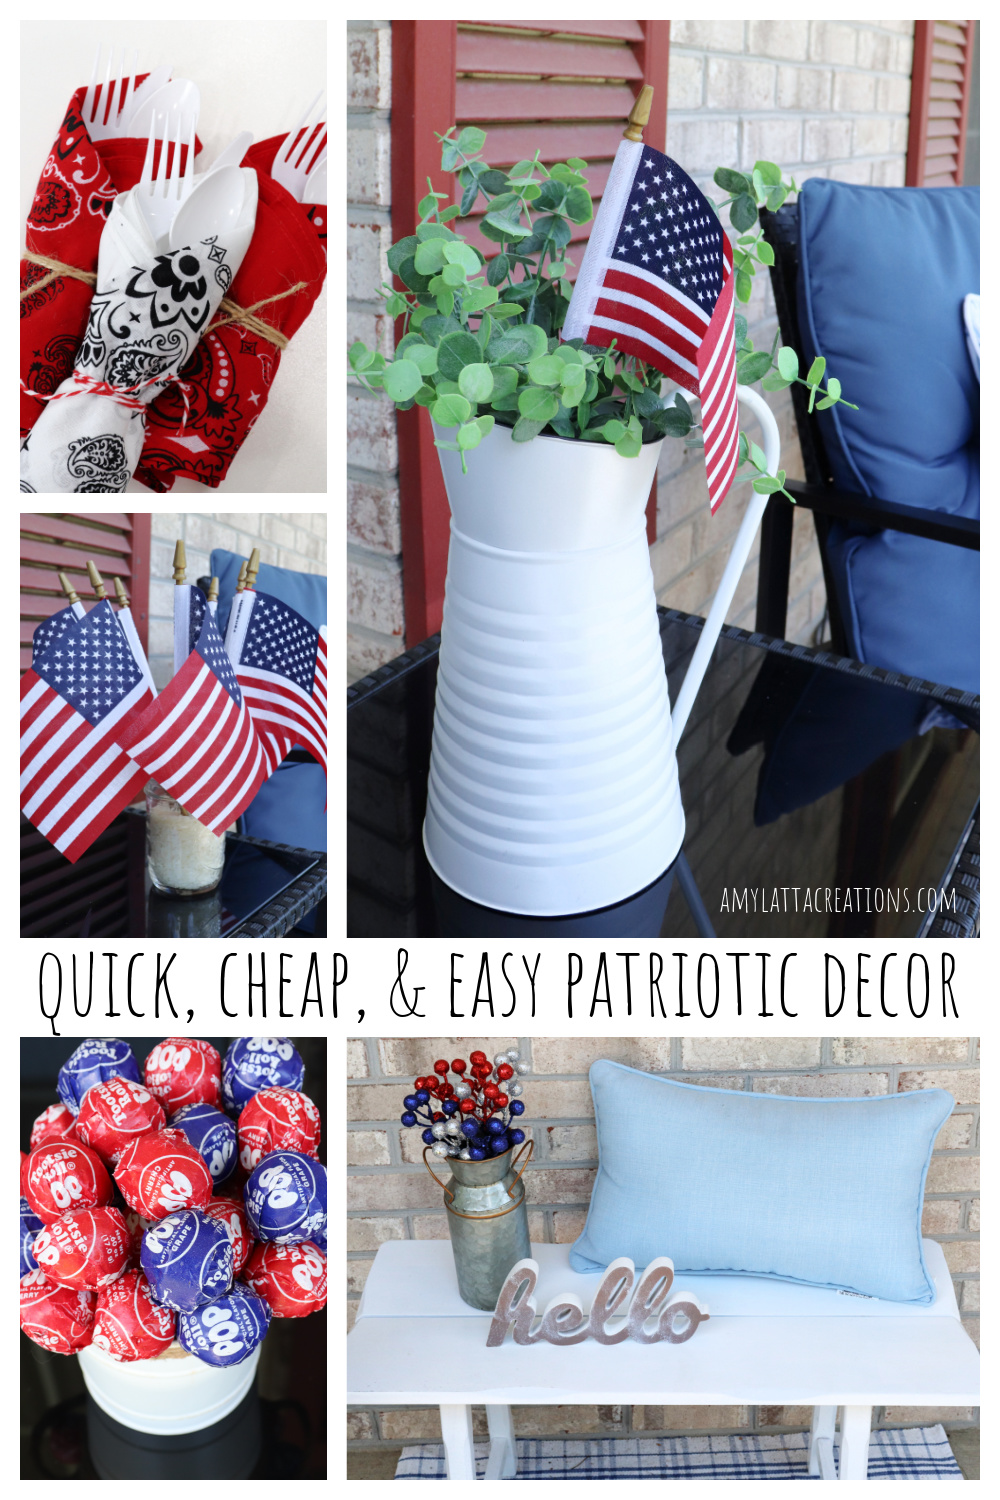 Image is a collage of patriotic home decor.